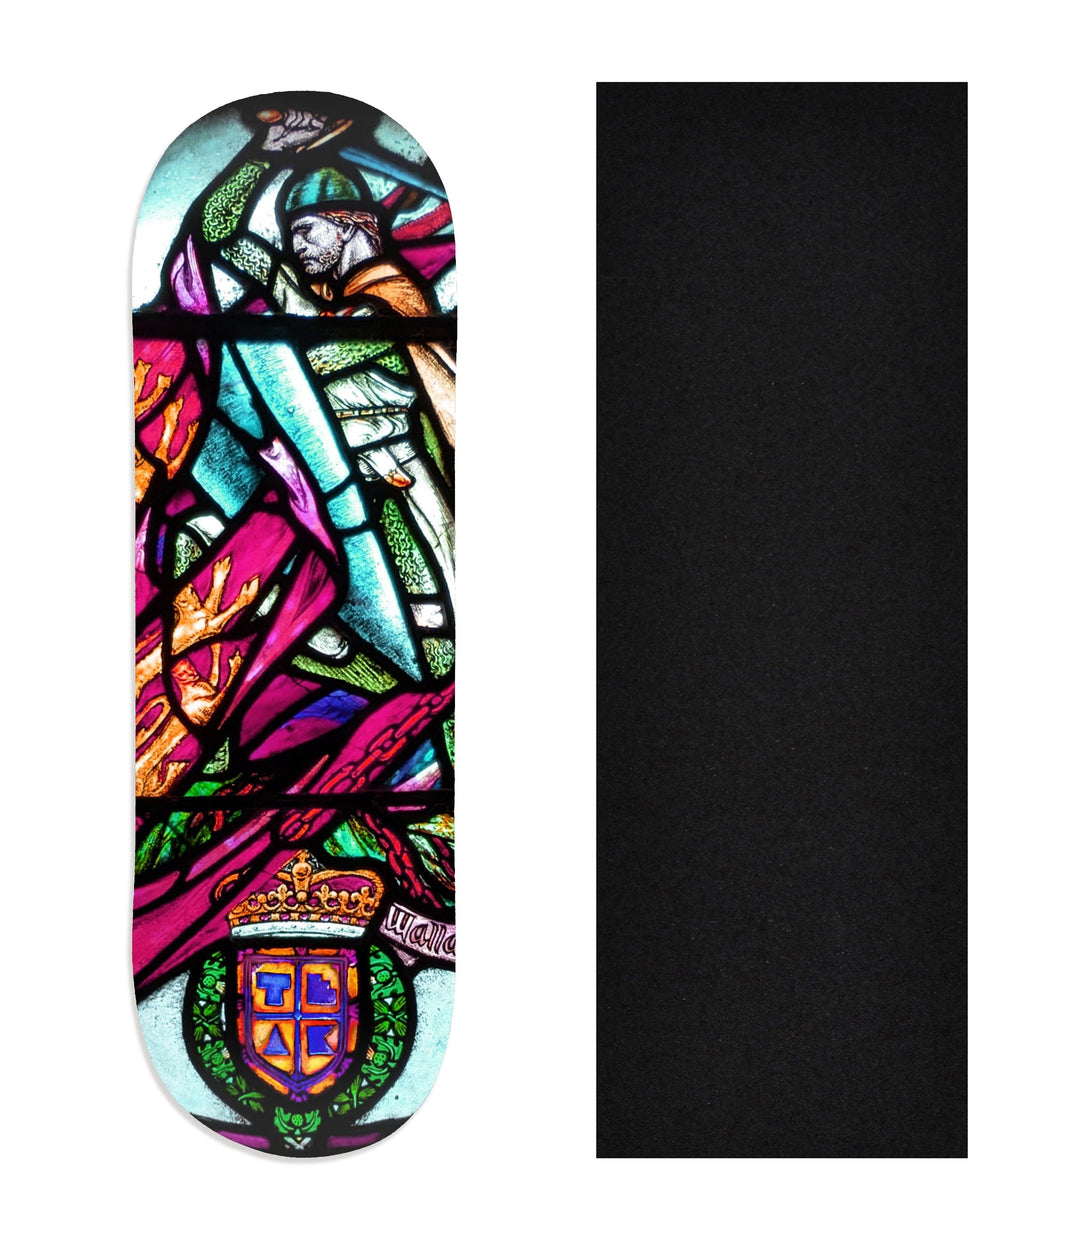 Teak Tuning Heat Transfer Graphic Wooden Fingerboard Deck, "Wallace Stained Glass" 29mm Deck